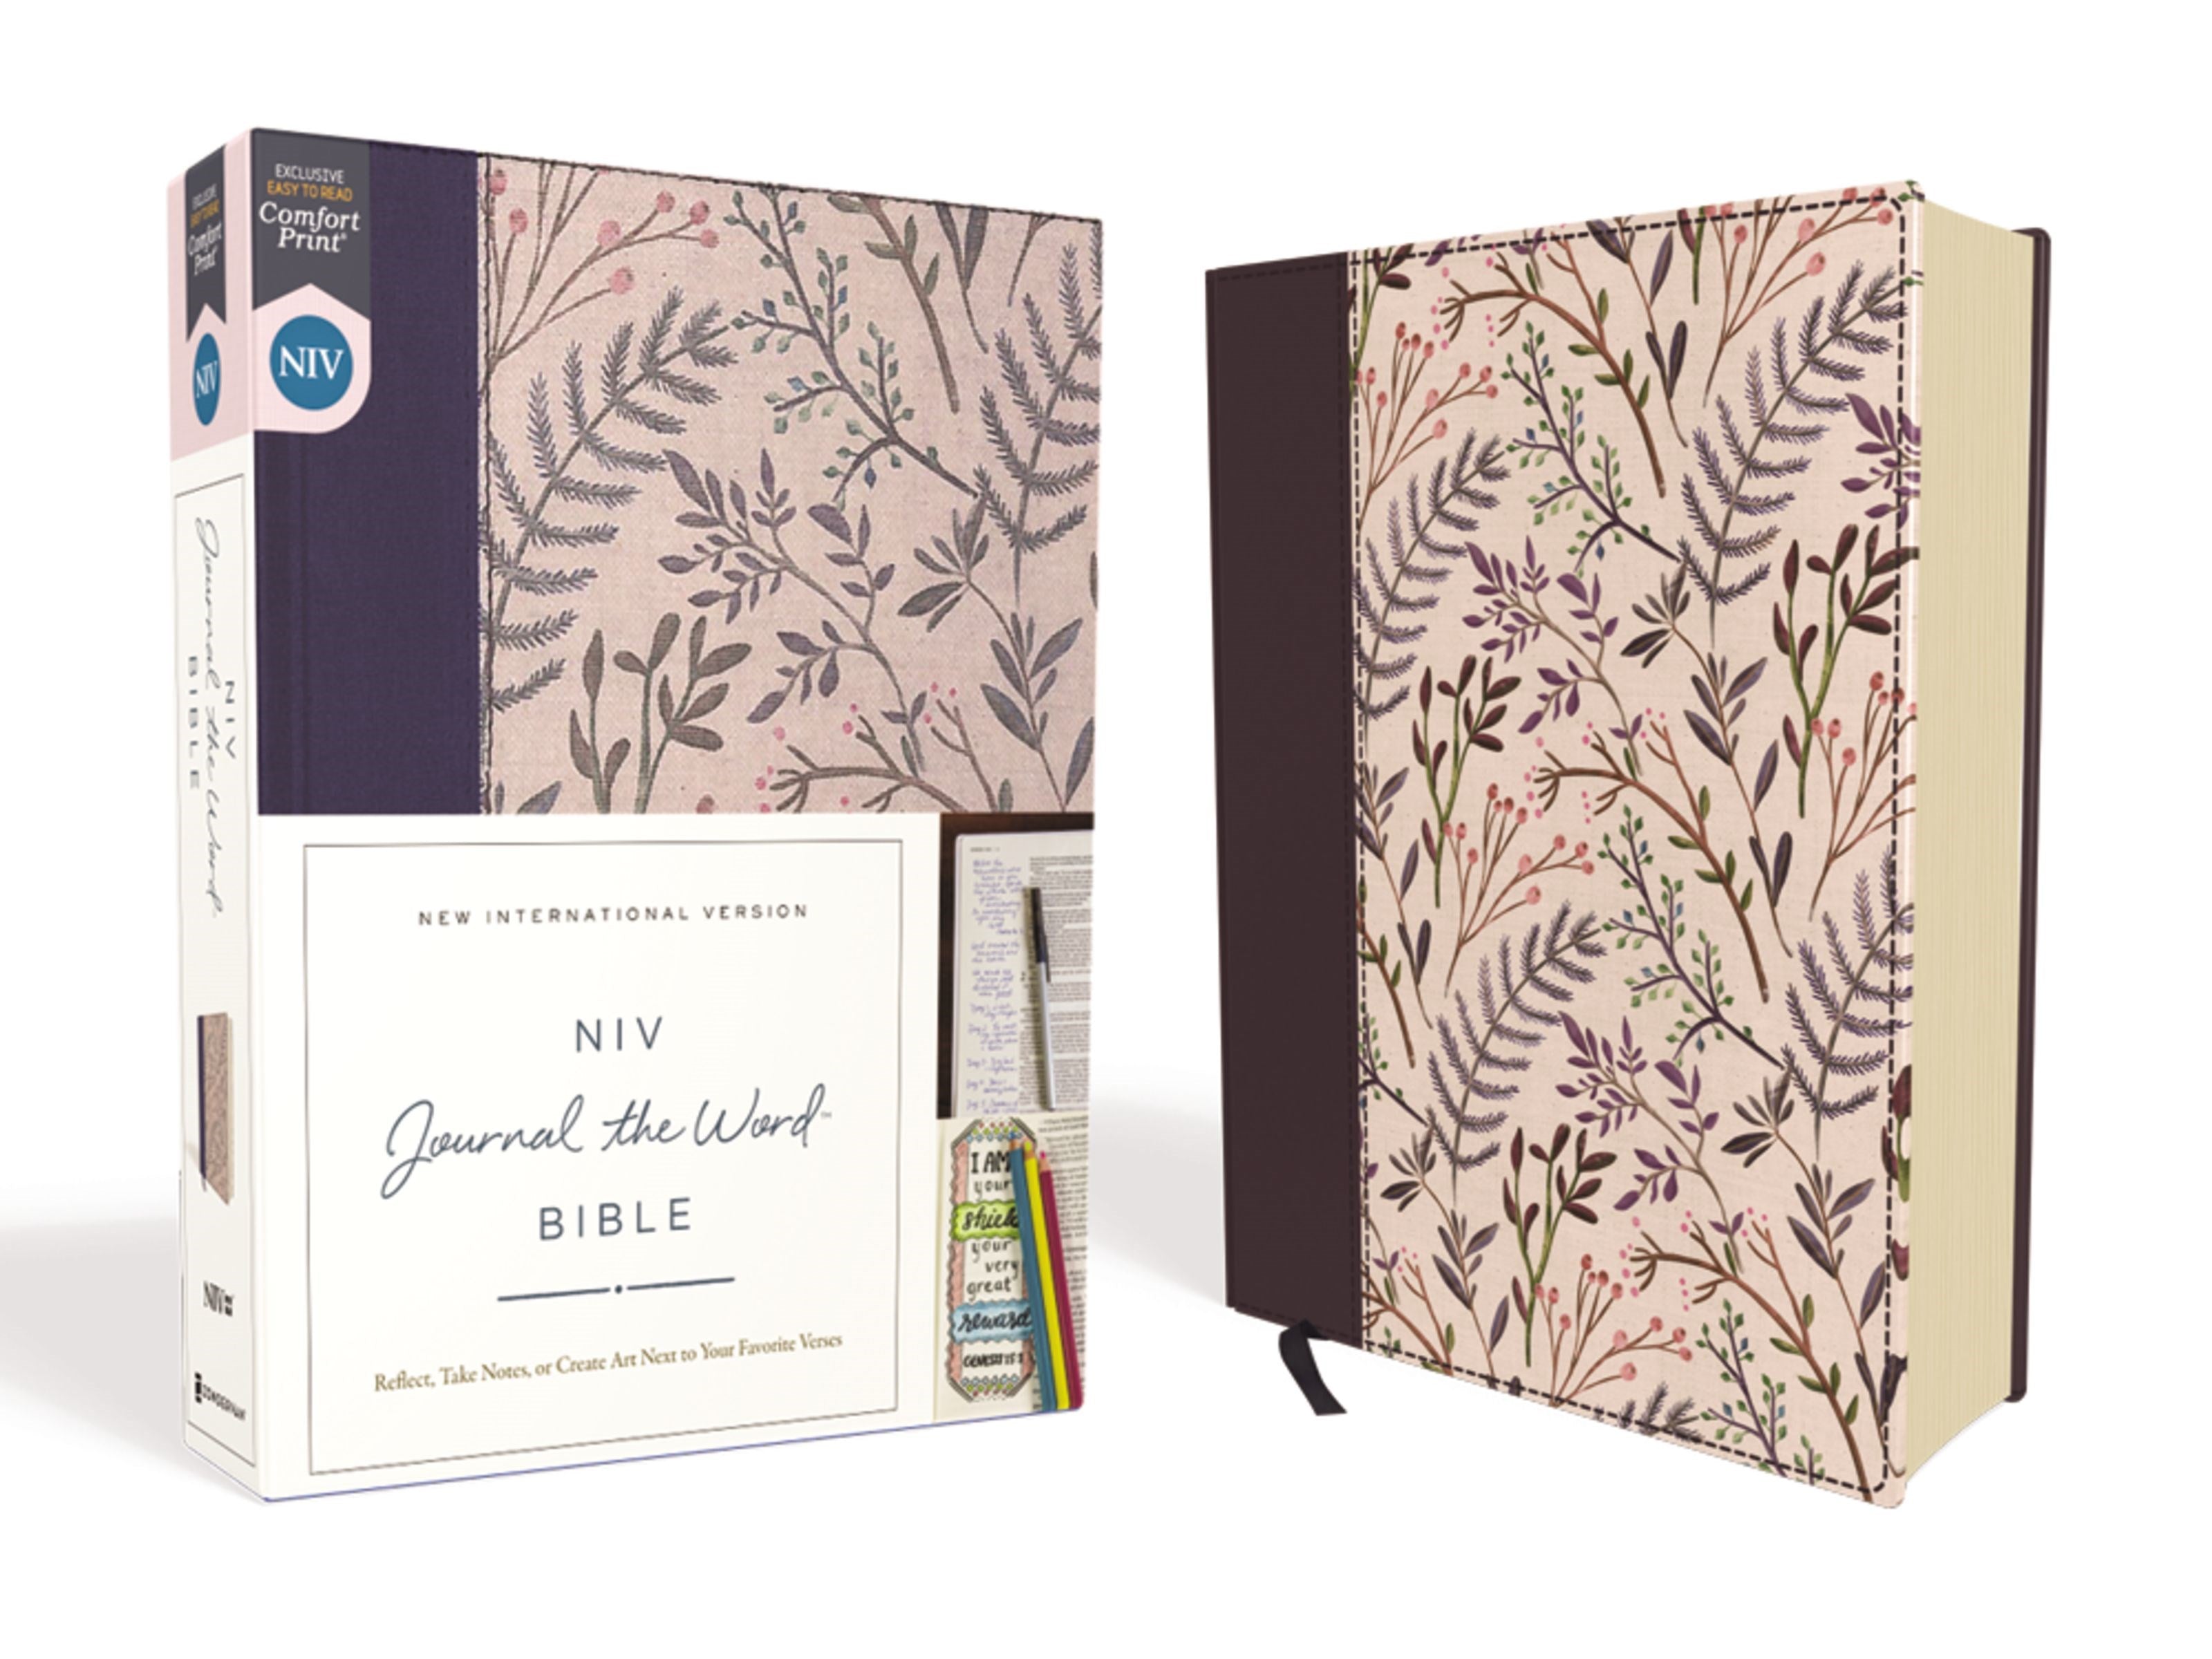 NIV, Journal the Word Bible (Perfect for Note-Taking), Cloth over Board, Pink Floral, Red Letter, Comfort Print: Reflect, Take Notes, or Create Art Next to Your Favorite Verses